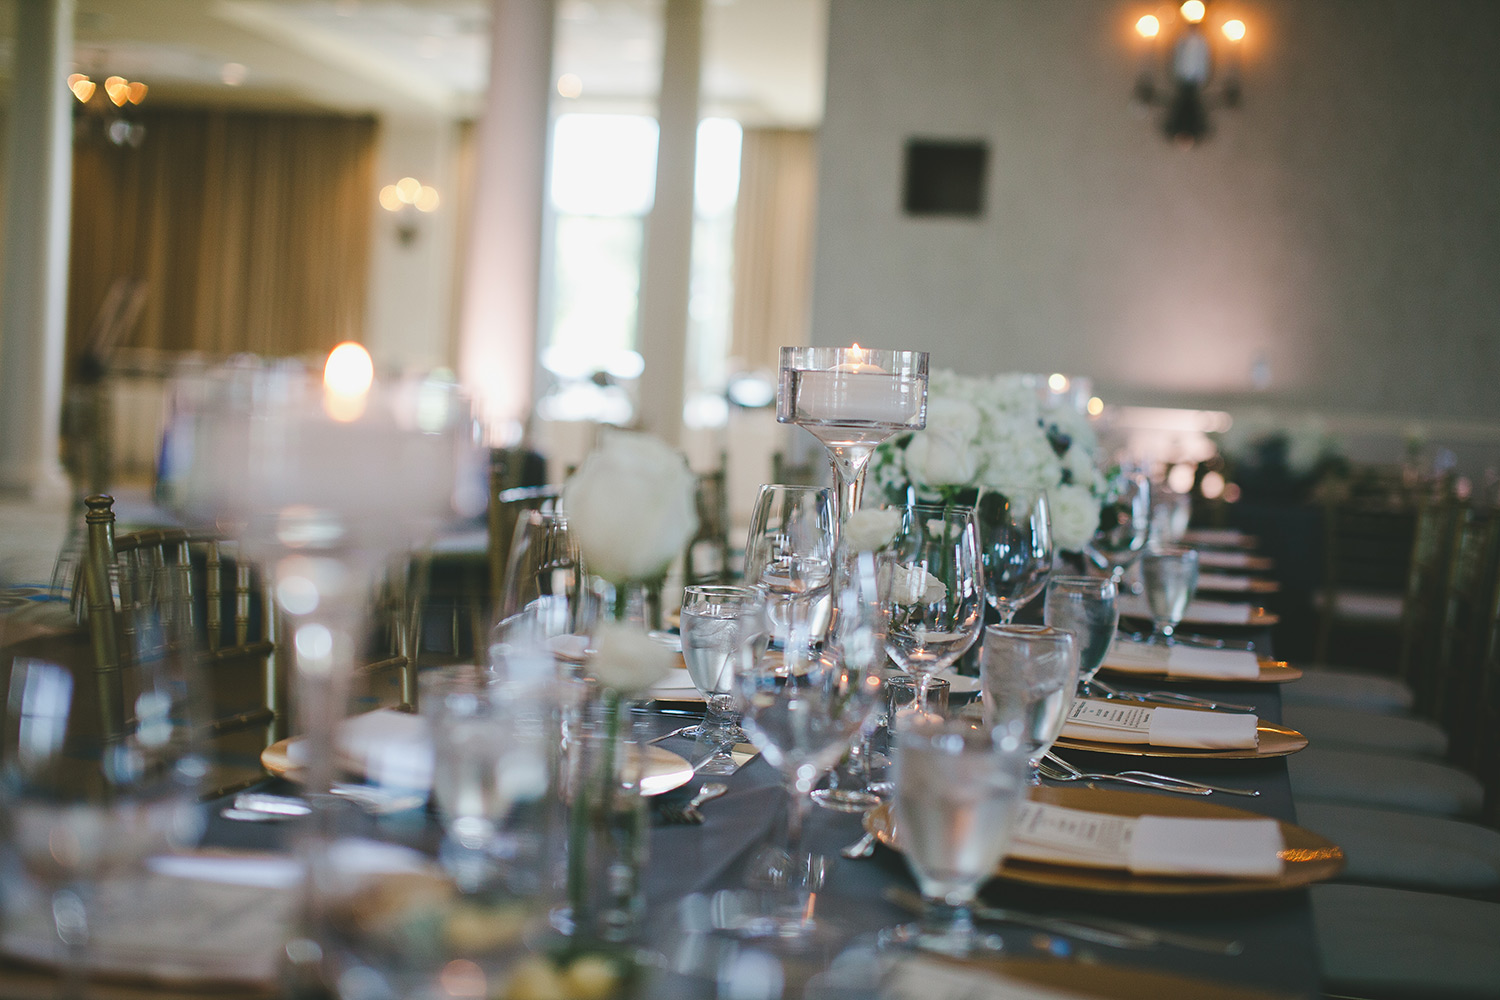 River Crest Country club grey linen with floating candles and gold chargers on table